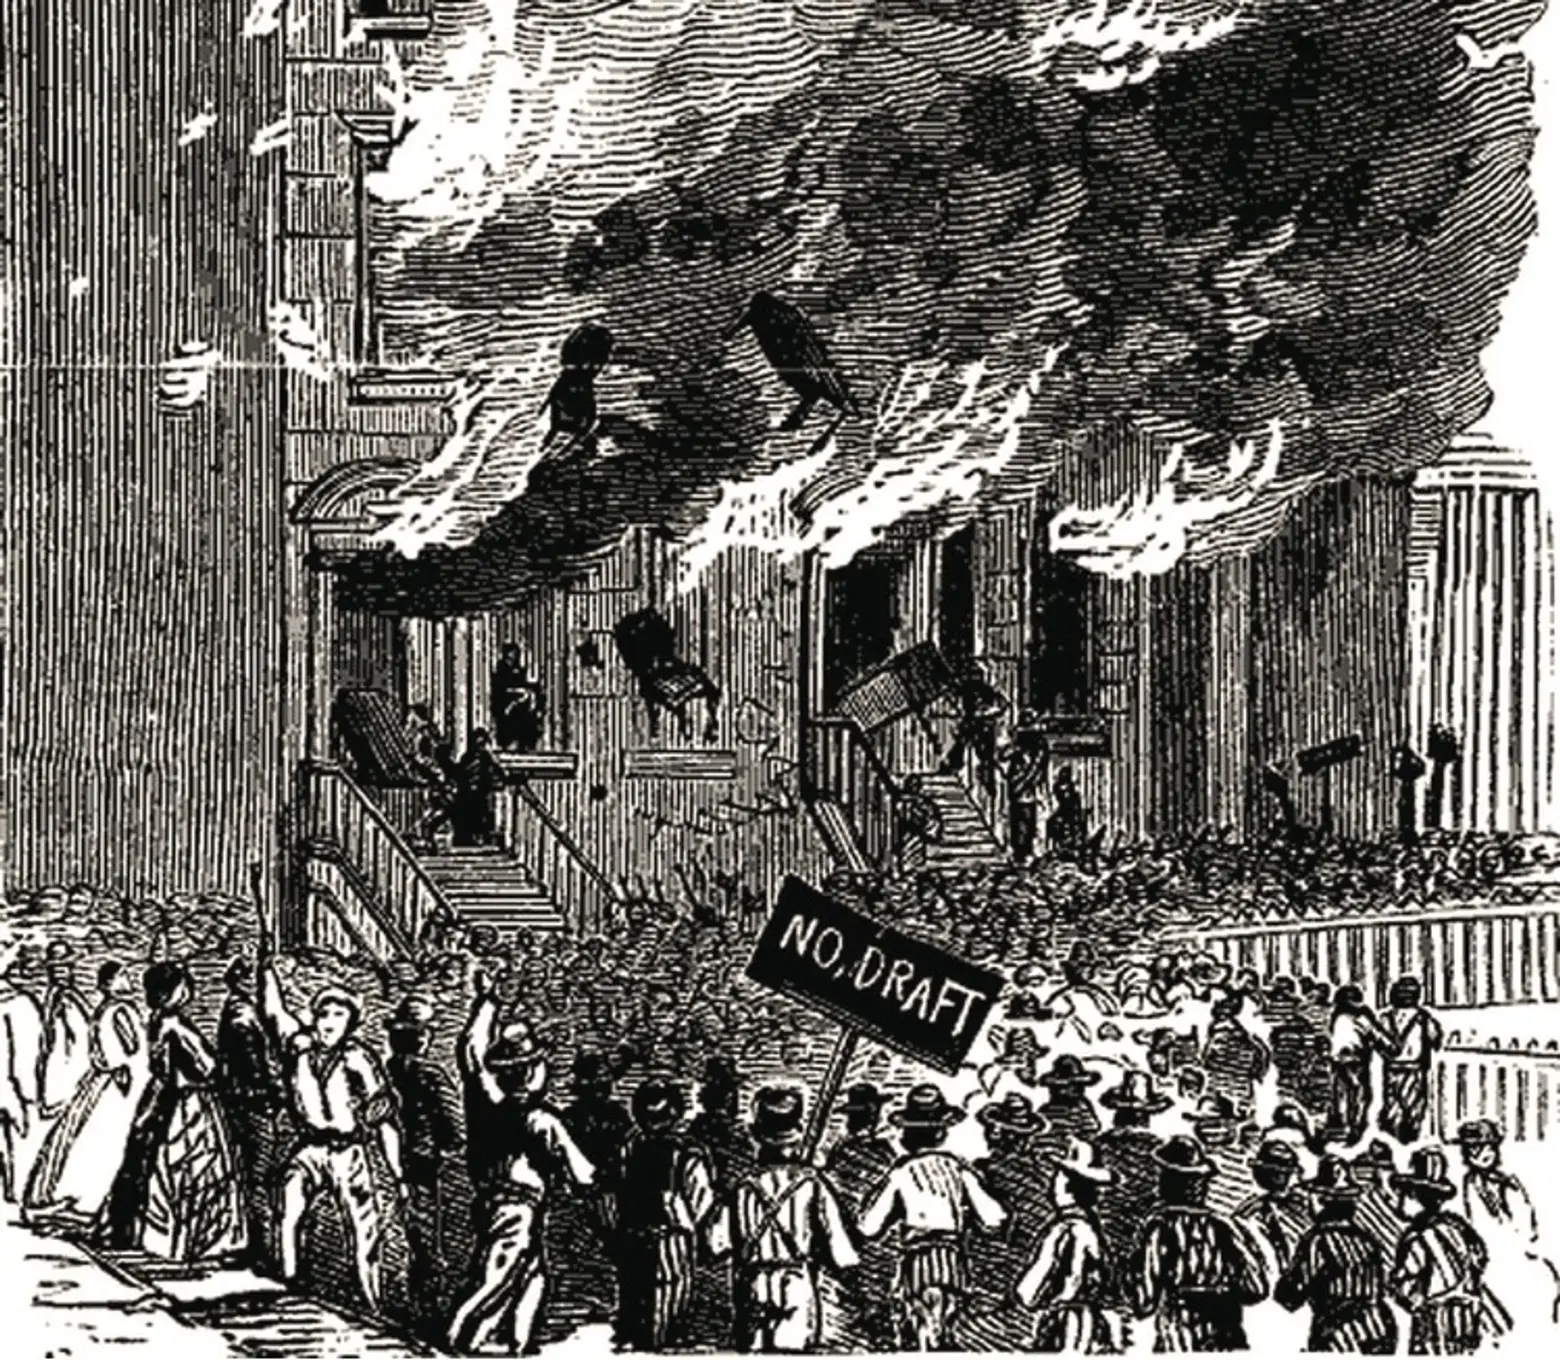 Etching of the 1863 Draft Riots